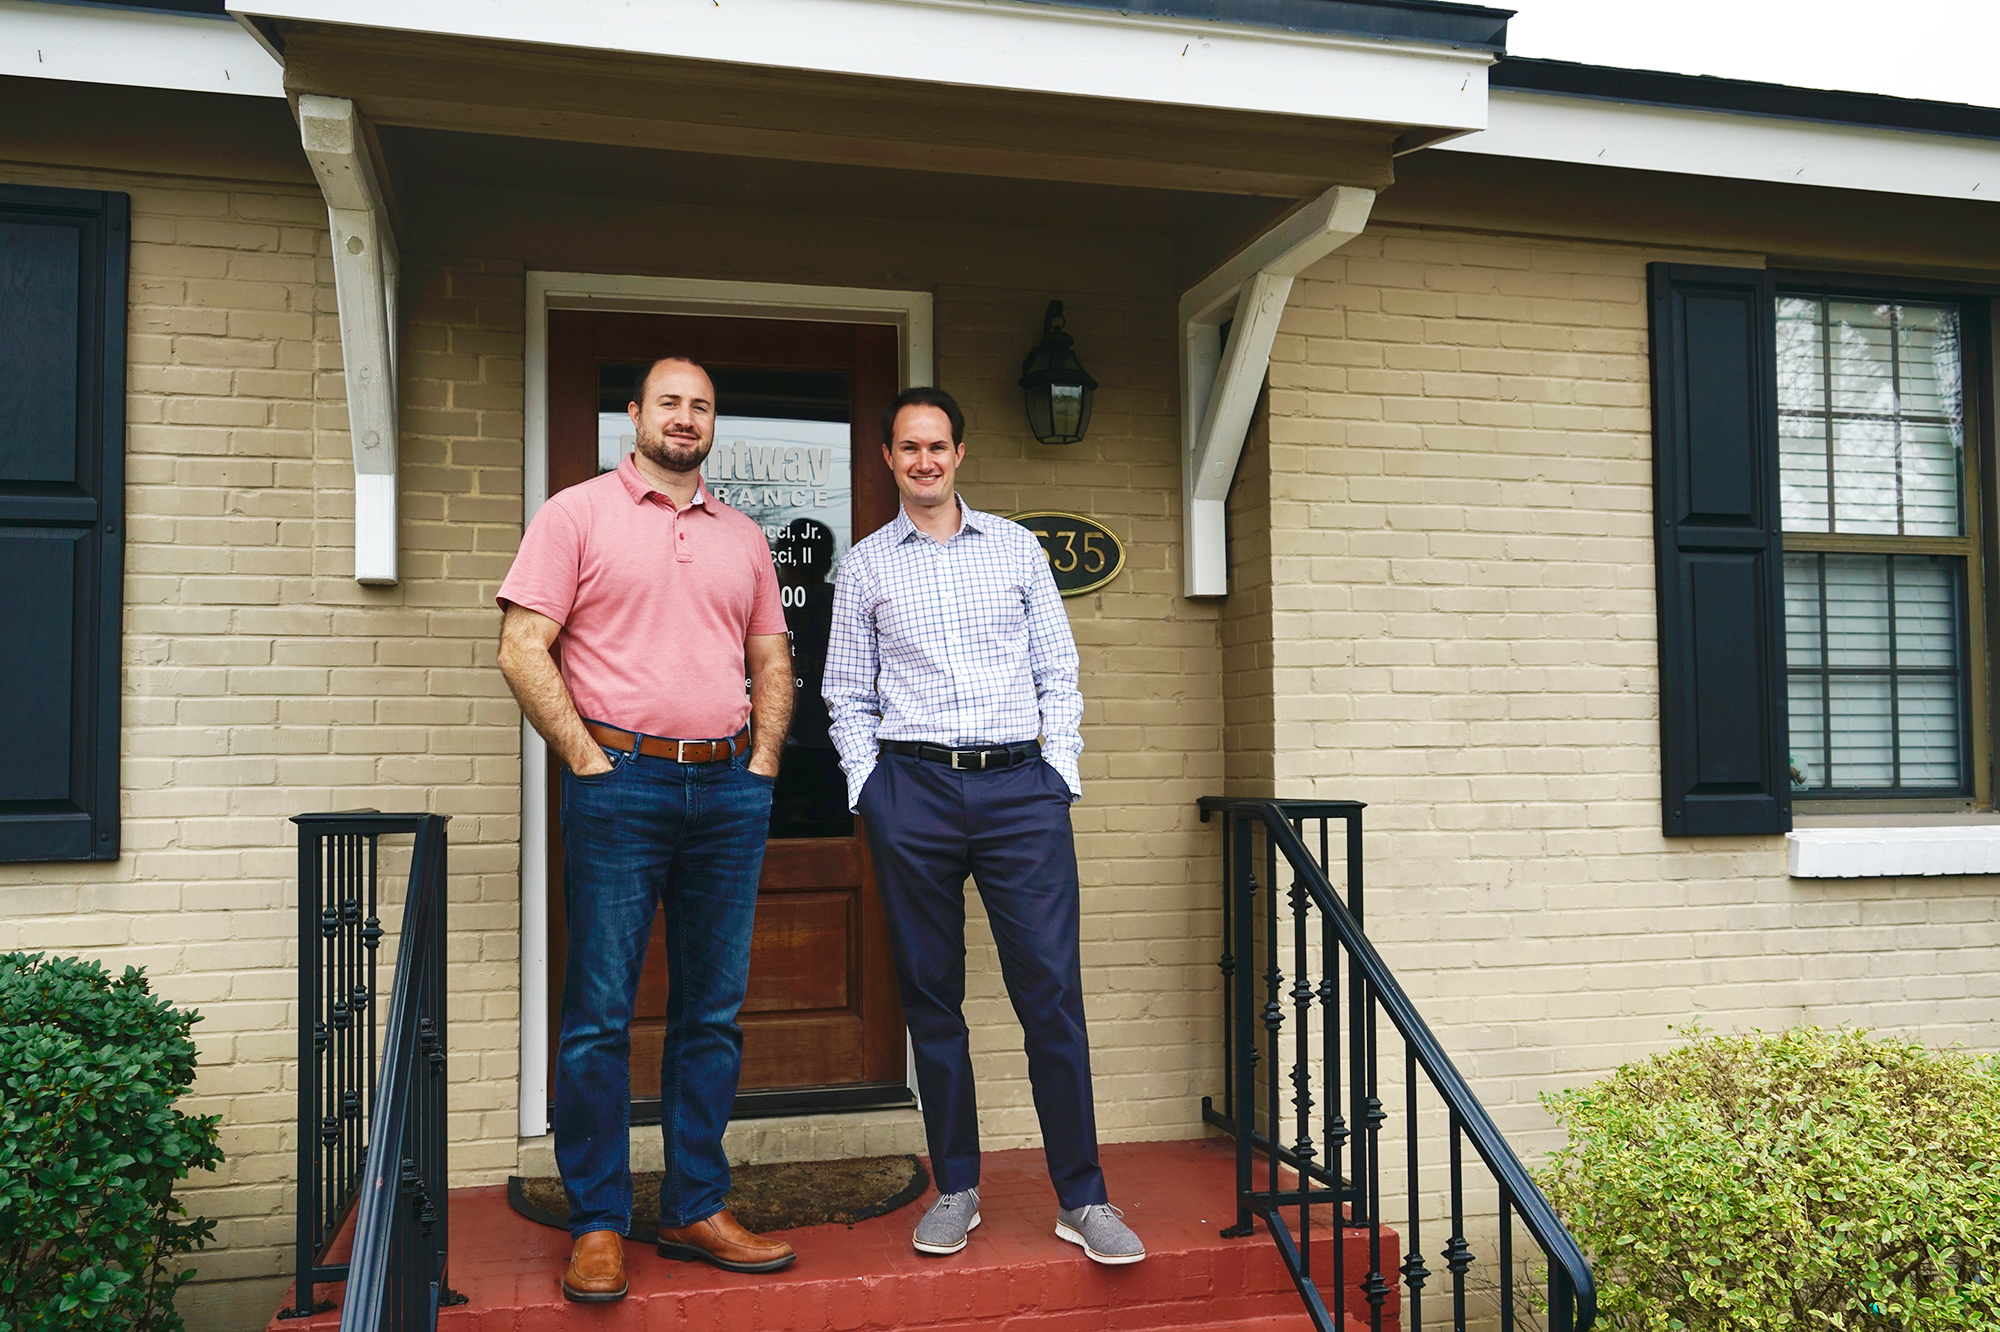 Matthew and Joe Carlucci are the owners of Brightway, The Carlucci Agency at 3535 Hendricks Ave.